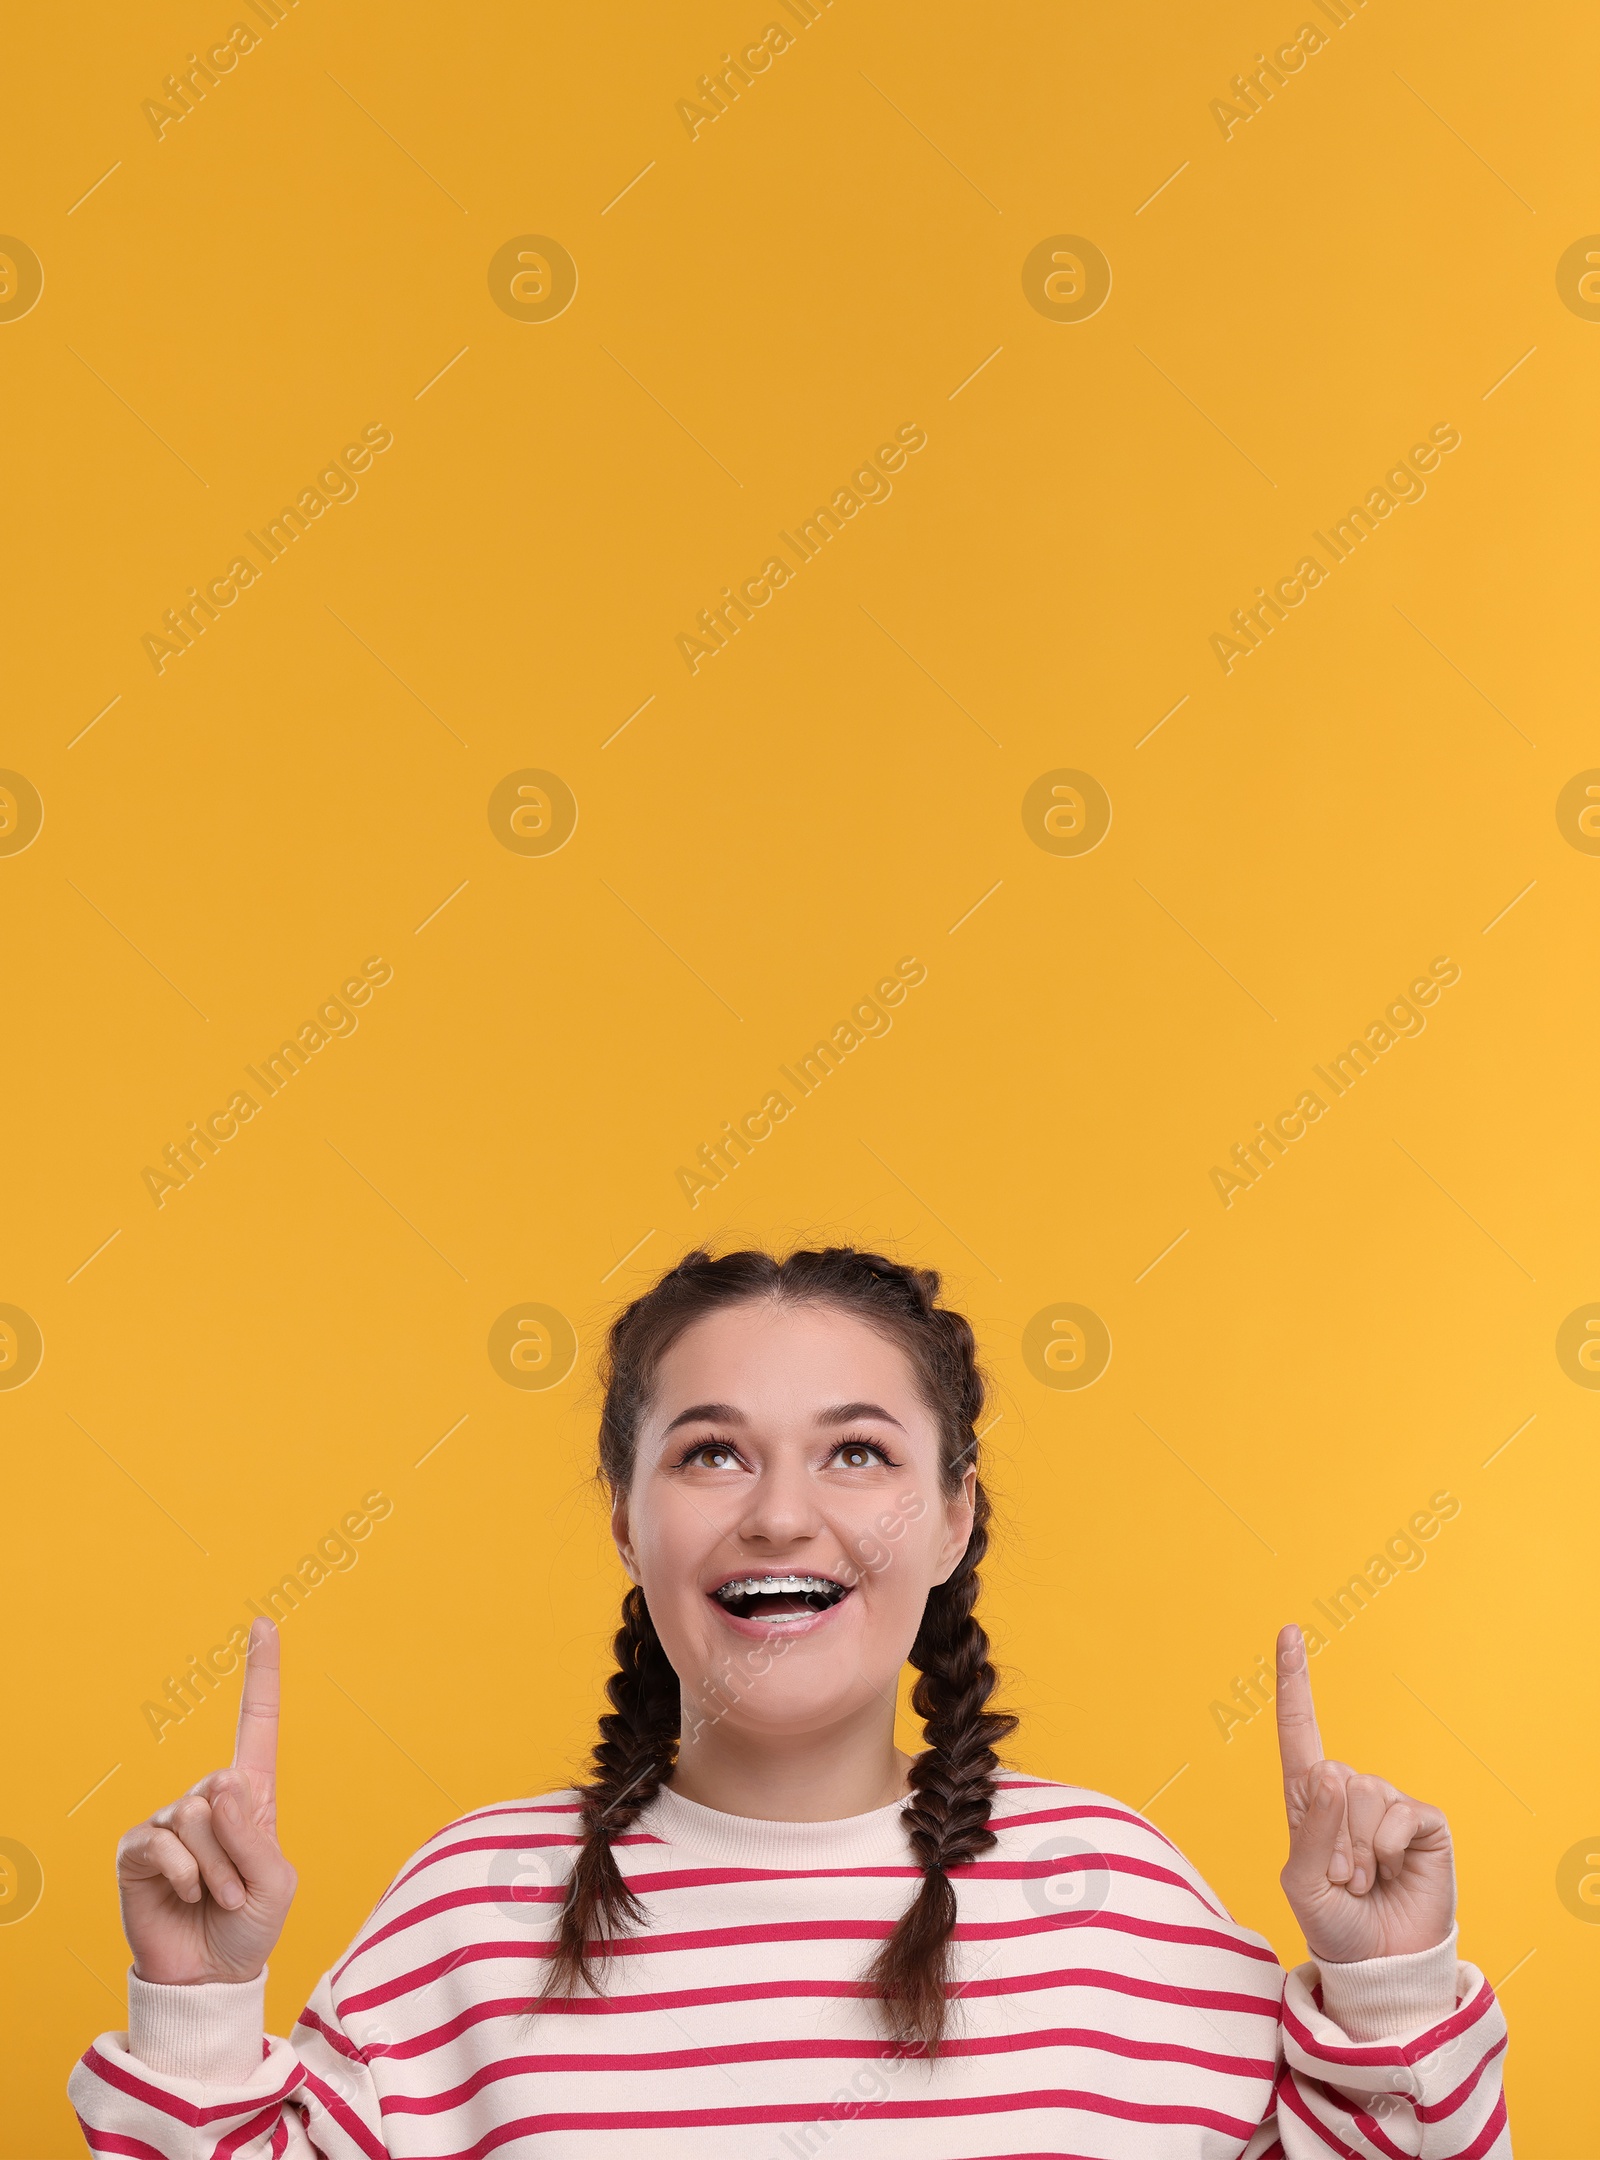 Image of Smiling woman with braces pointing at something on orange background. Space for text